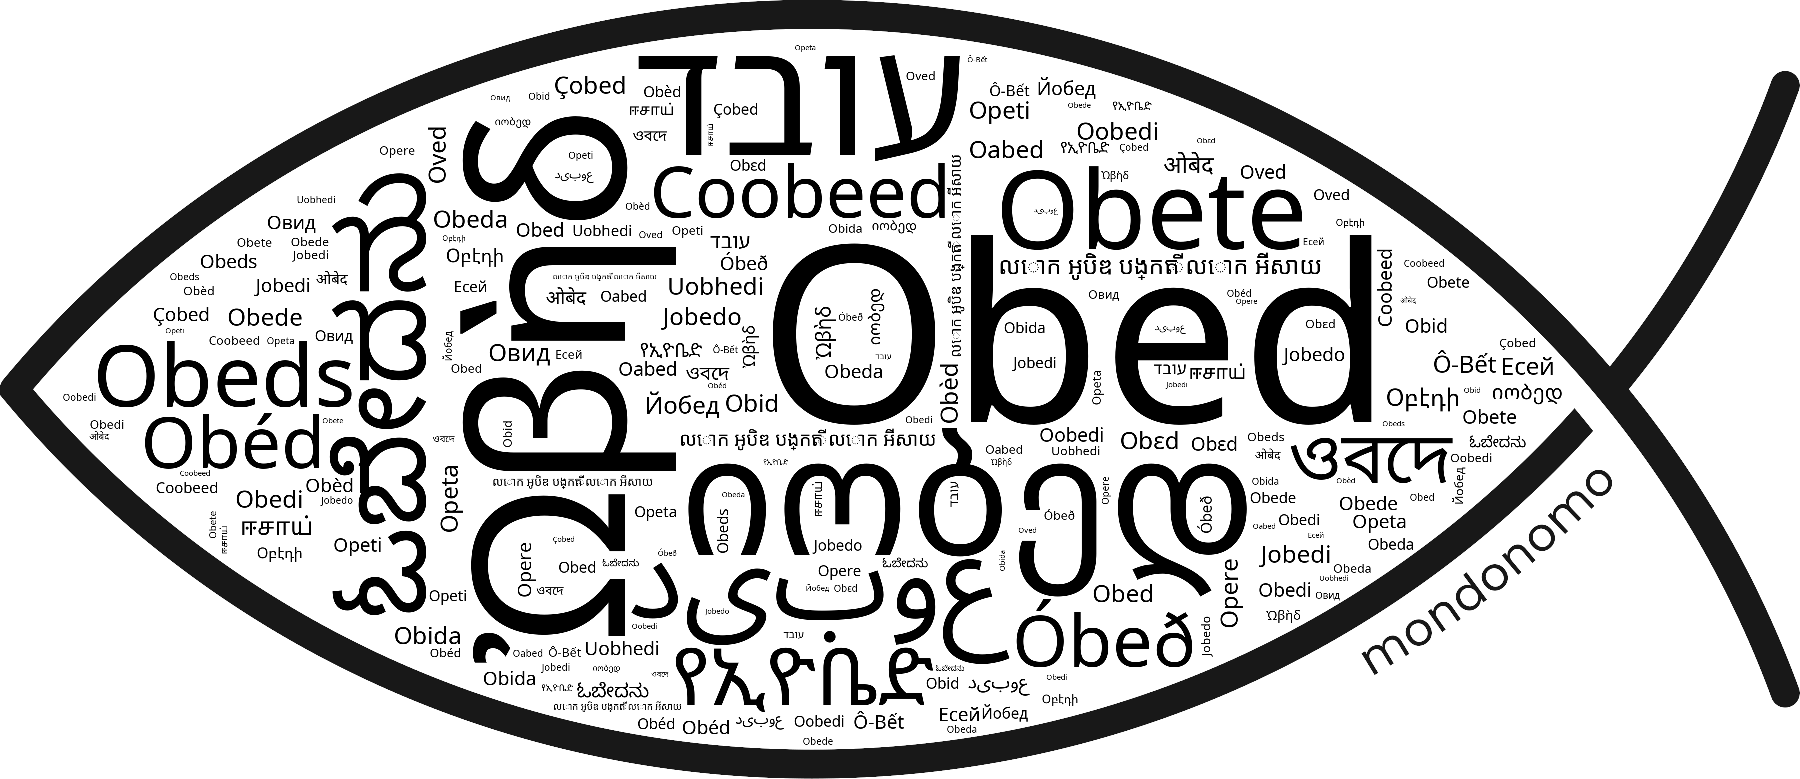 Name Obed in the world's Bibles